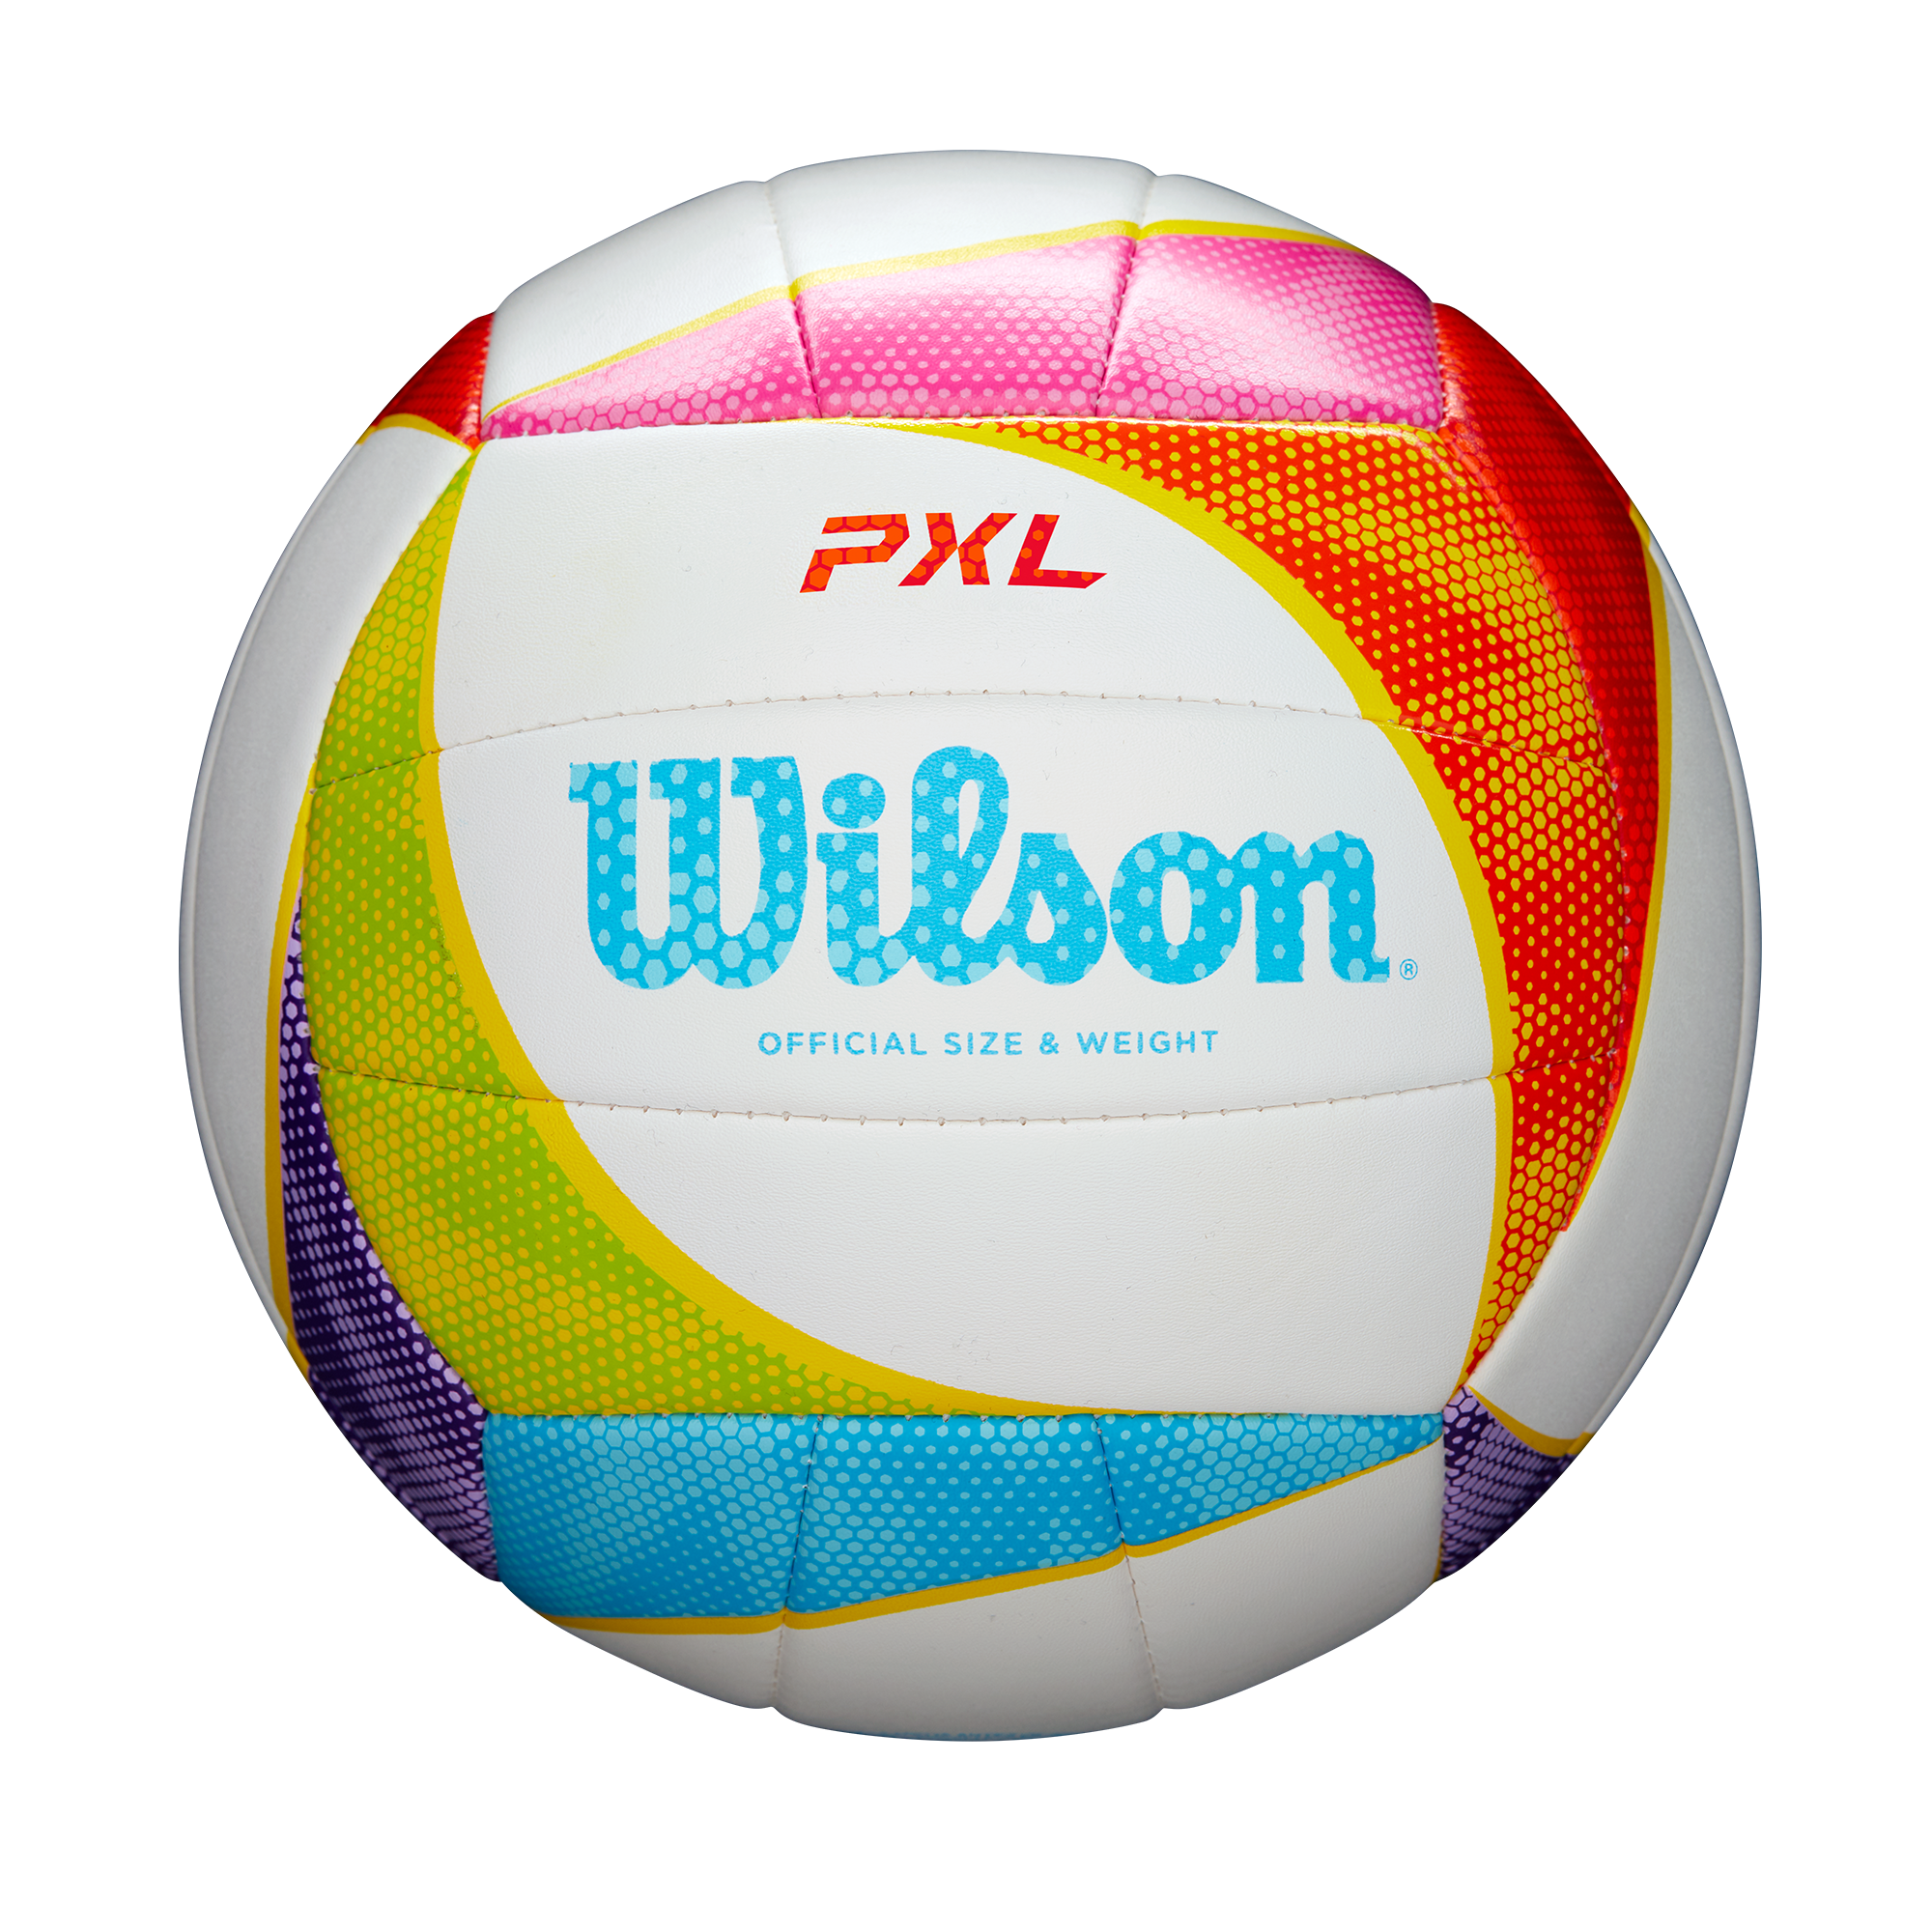 Volleyball 'PXL' Größe 5 + product picture